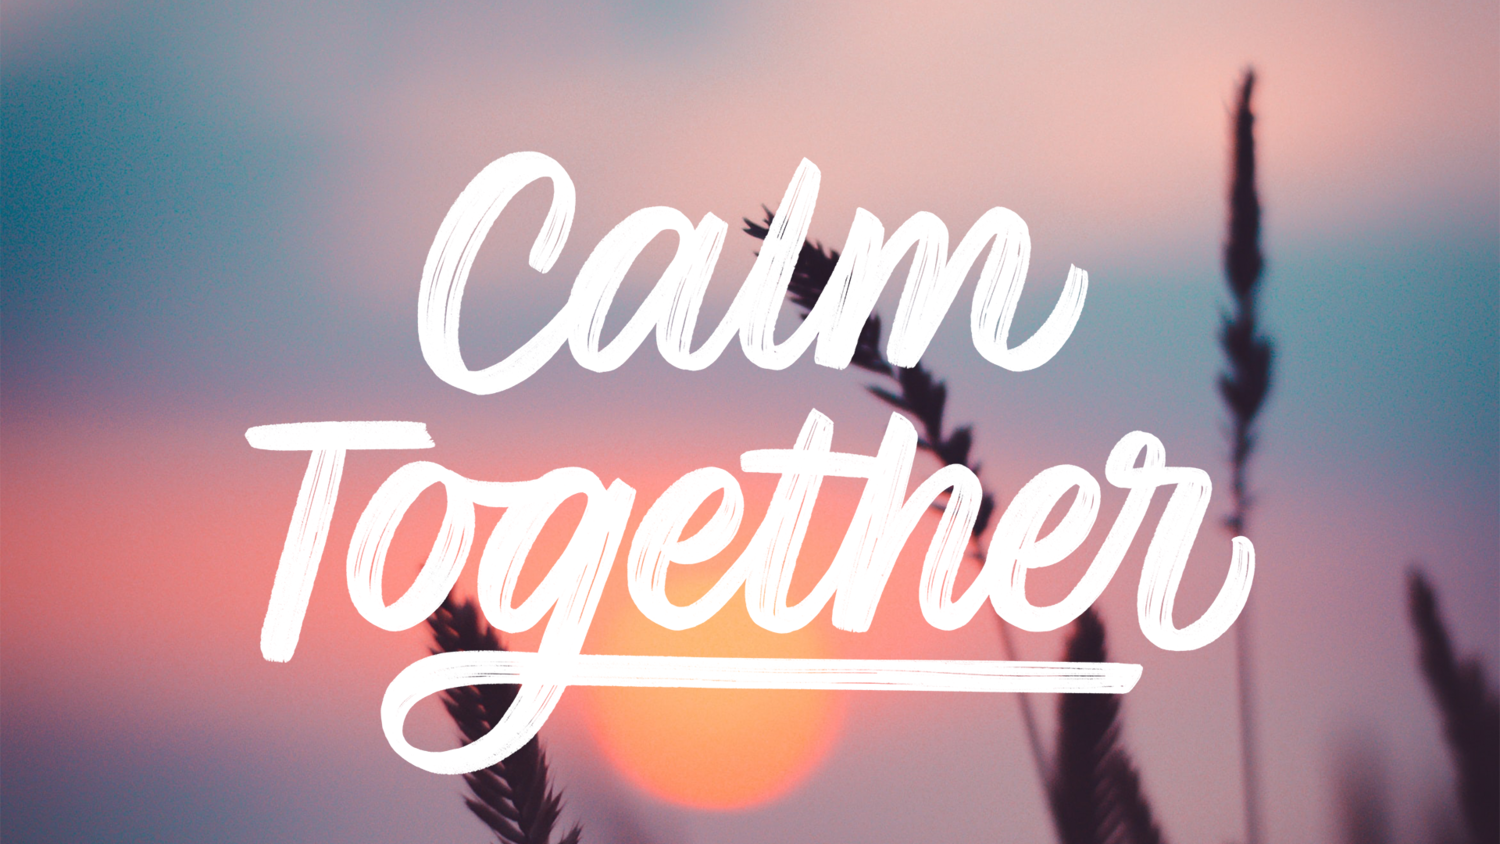 Let’s look after ourselves, and each other. — Calm Blog